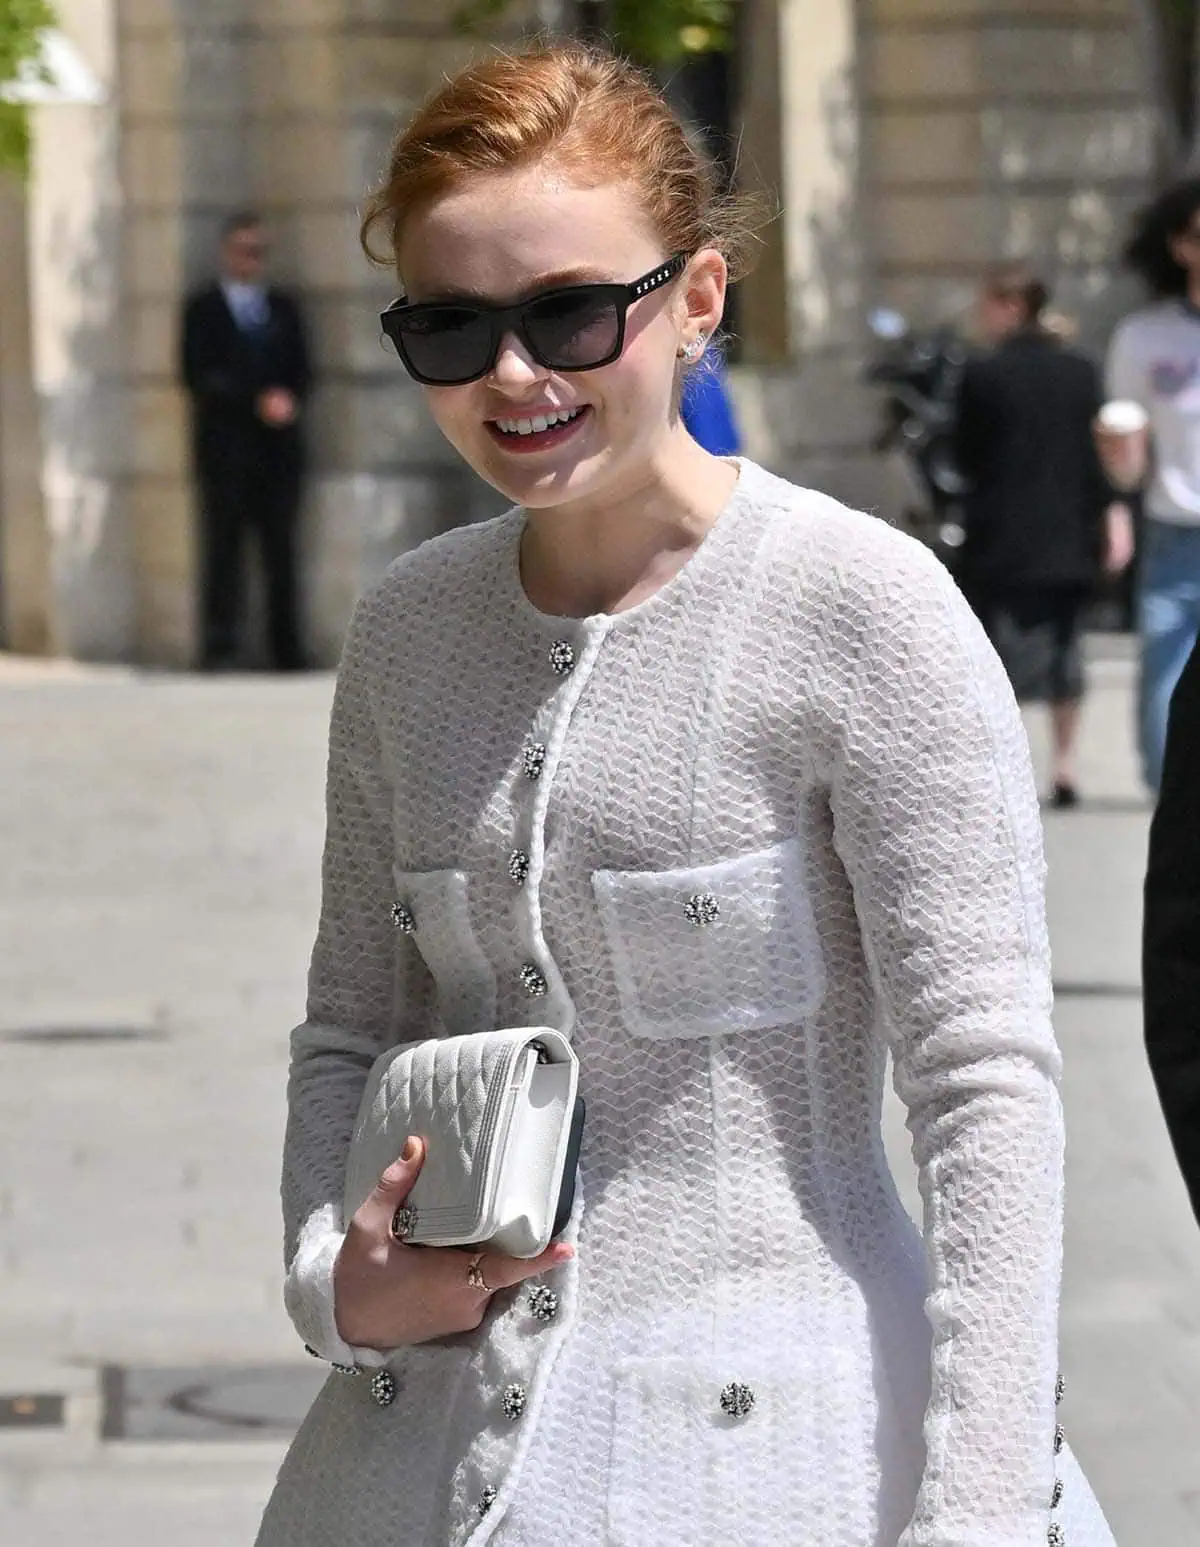 Sadie Sink accessorizes her white dress with white gold and yellow gold jewelry by Chanel, a white Chanel purse, and black sunnies